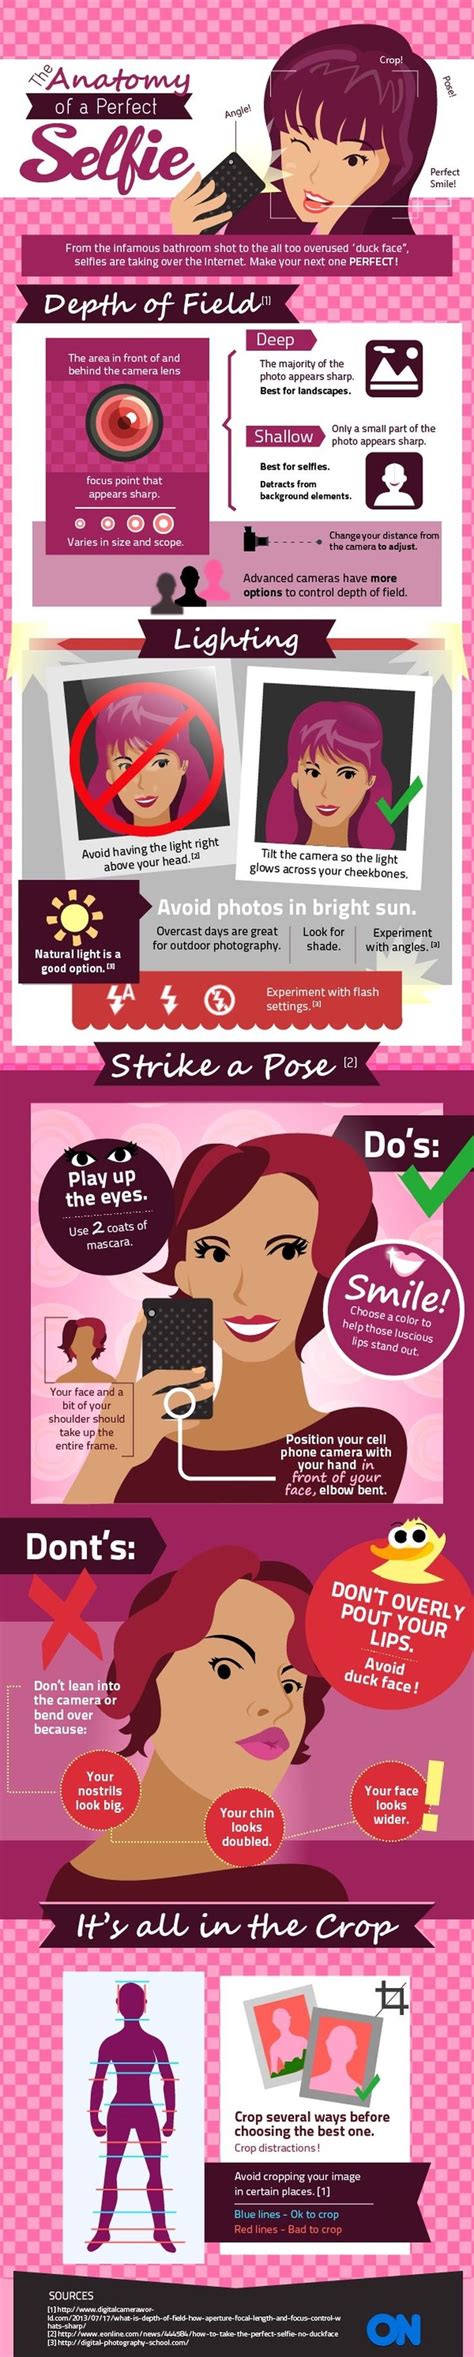 Best Images About Infografias On Pinterest Salud Marketing And